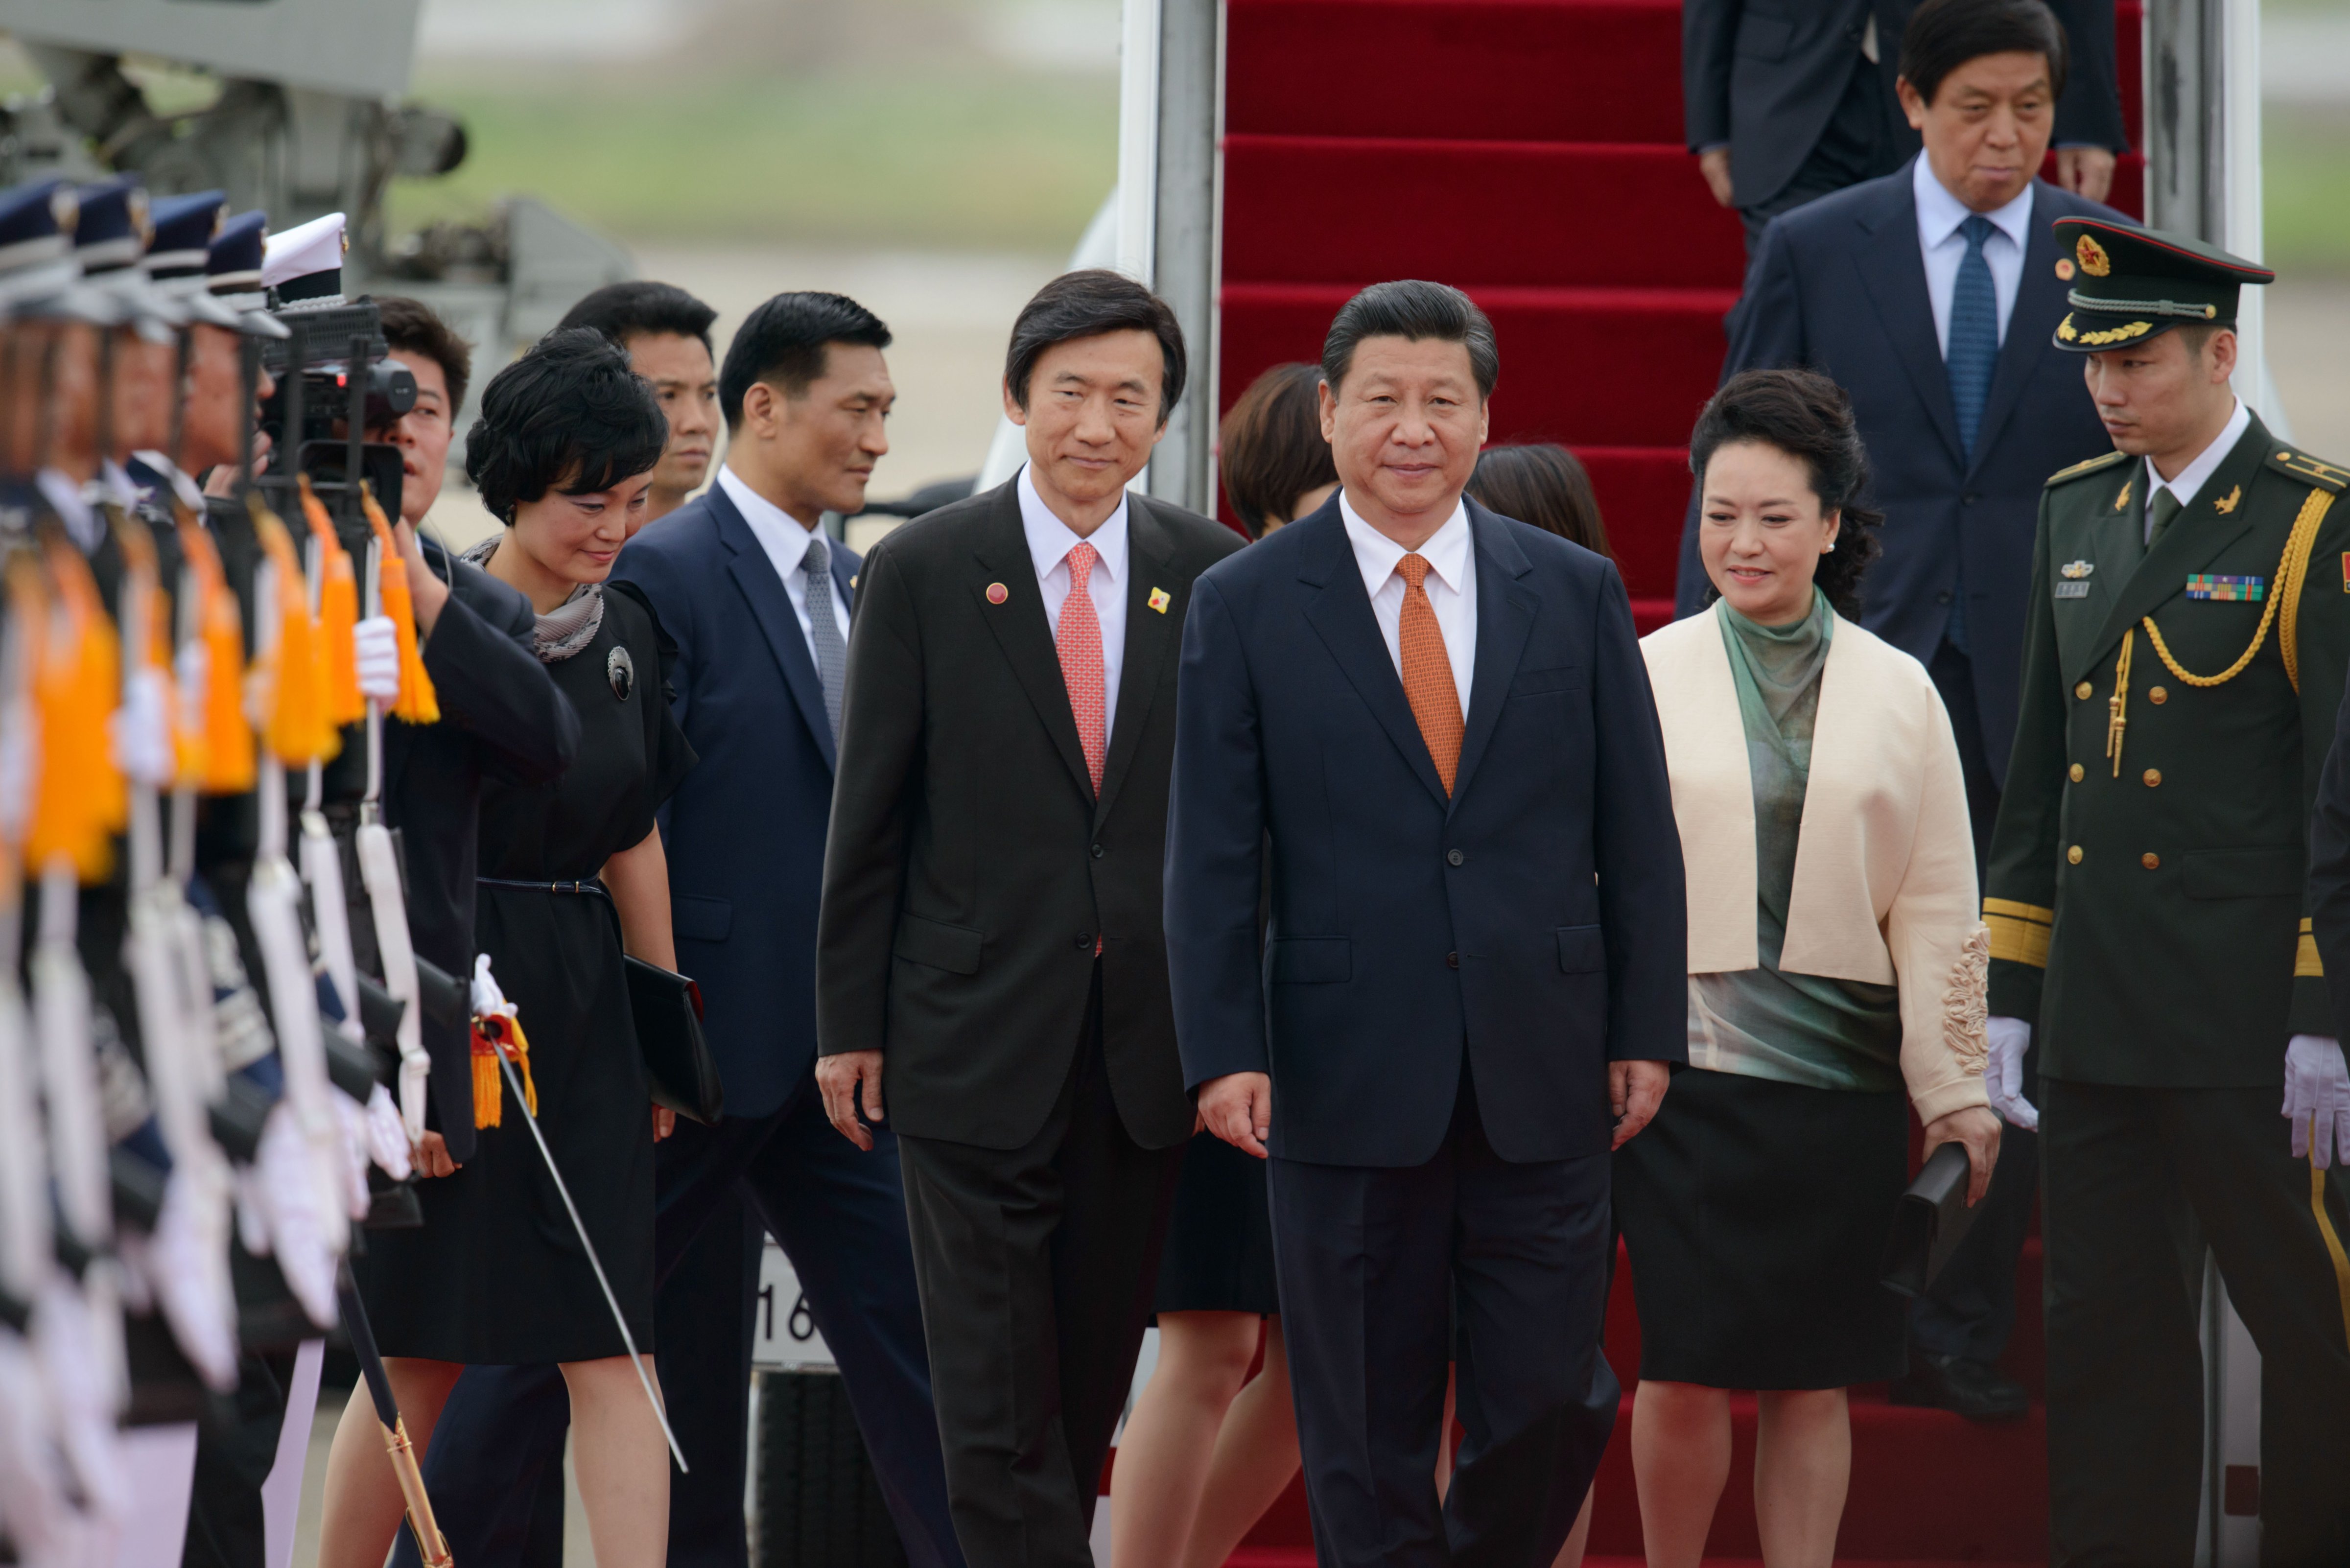 China's President Xi Jinping and his wife Peng Liyuan are welcomed upon arrival at Seoul Air Base on July 3, 2014 (Ed Jones—AFP/Getty Images)